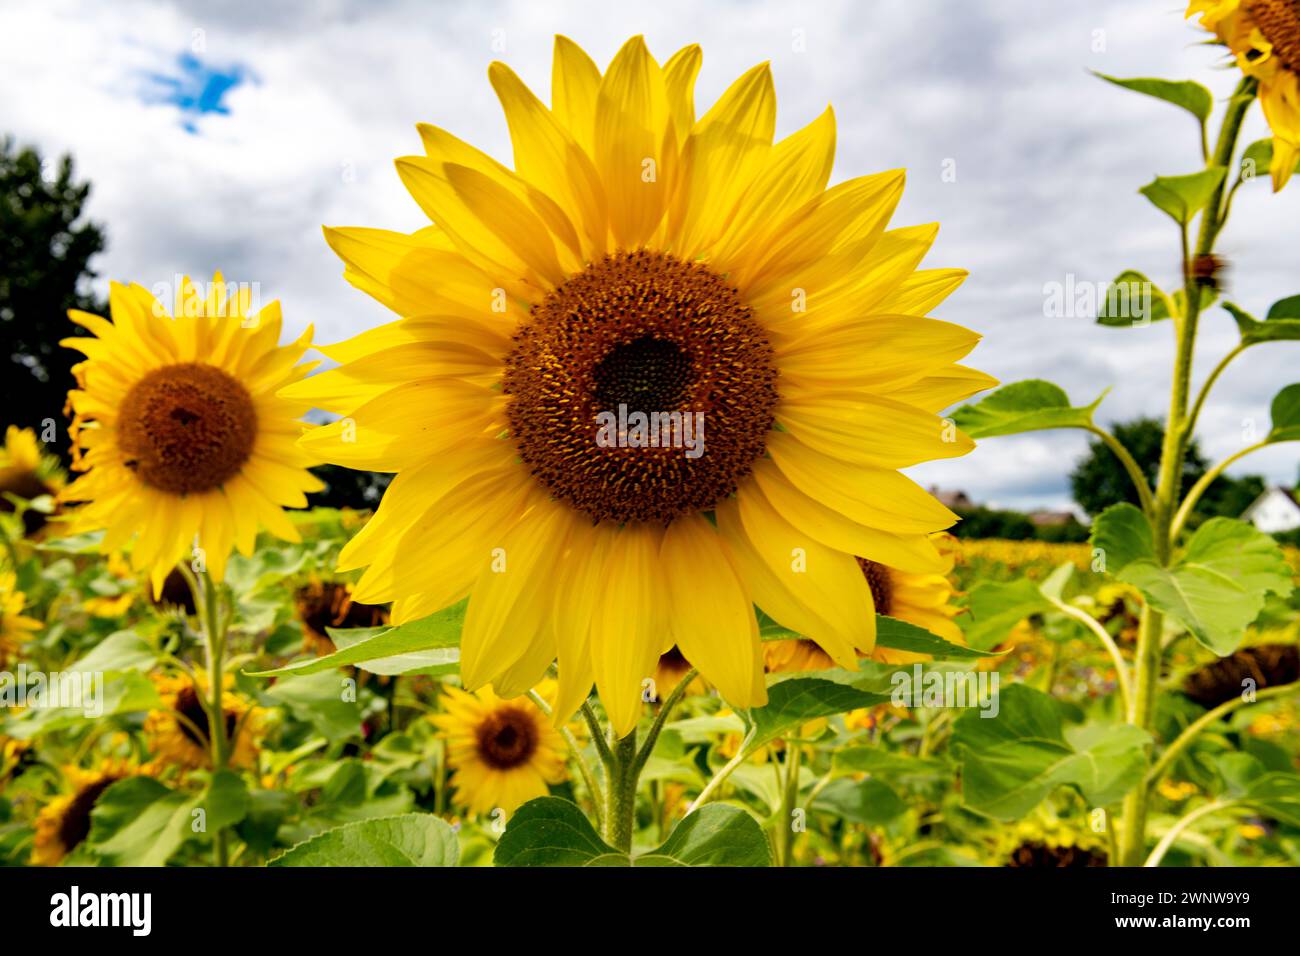 The blossom of a sunflower standing alone, slightly blurred sunflowers and blurred sky in the background. Stock Photo